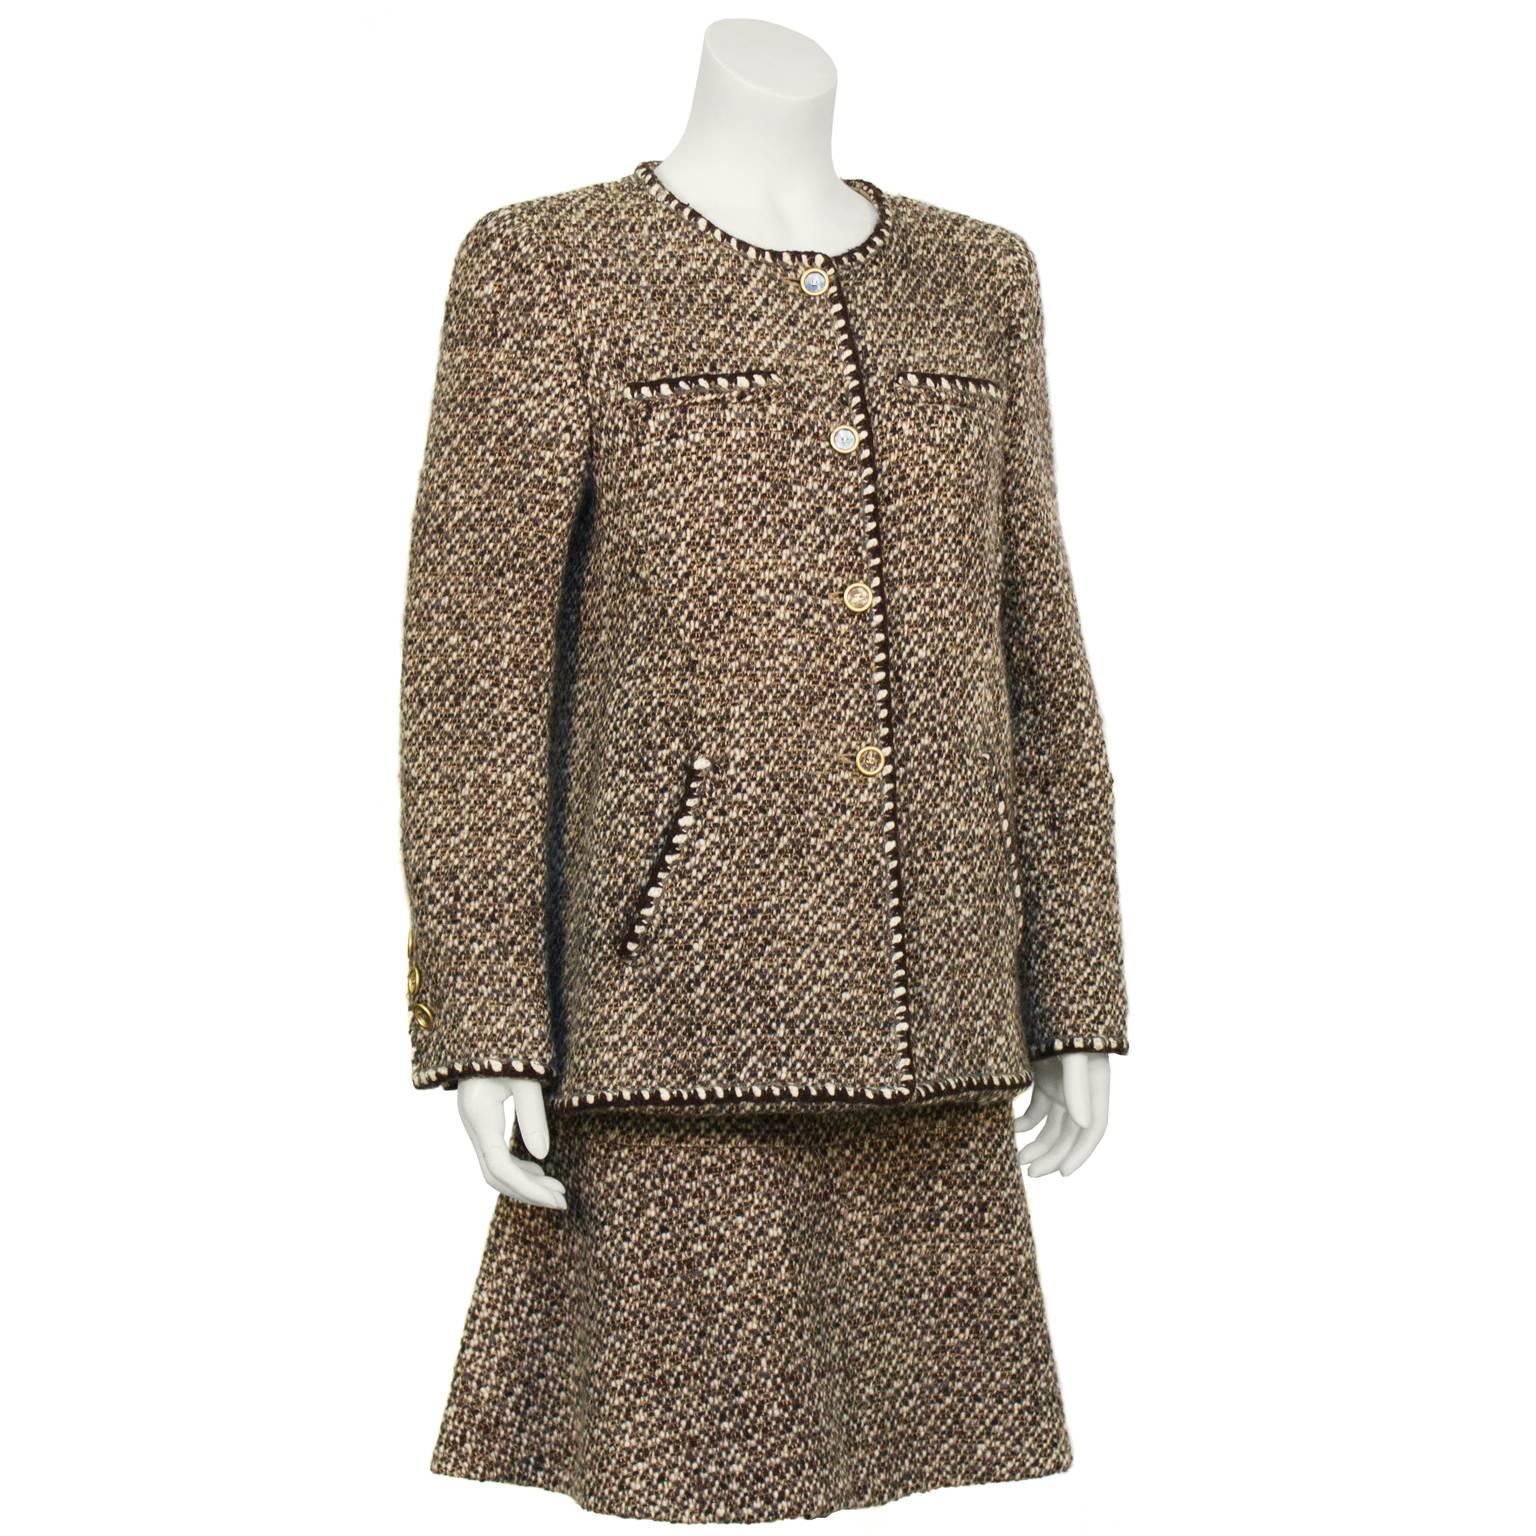 Chanel brown and white boucle skirt suit from the Fall 2001 collection. The slight a-line jacket has straight patch pockets on the bust, diagonal slit pockets at the hips and unique fabric filled plexi and gold tone buttons. The matching skirt